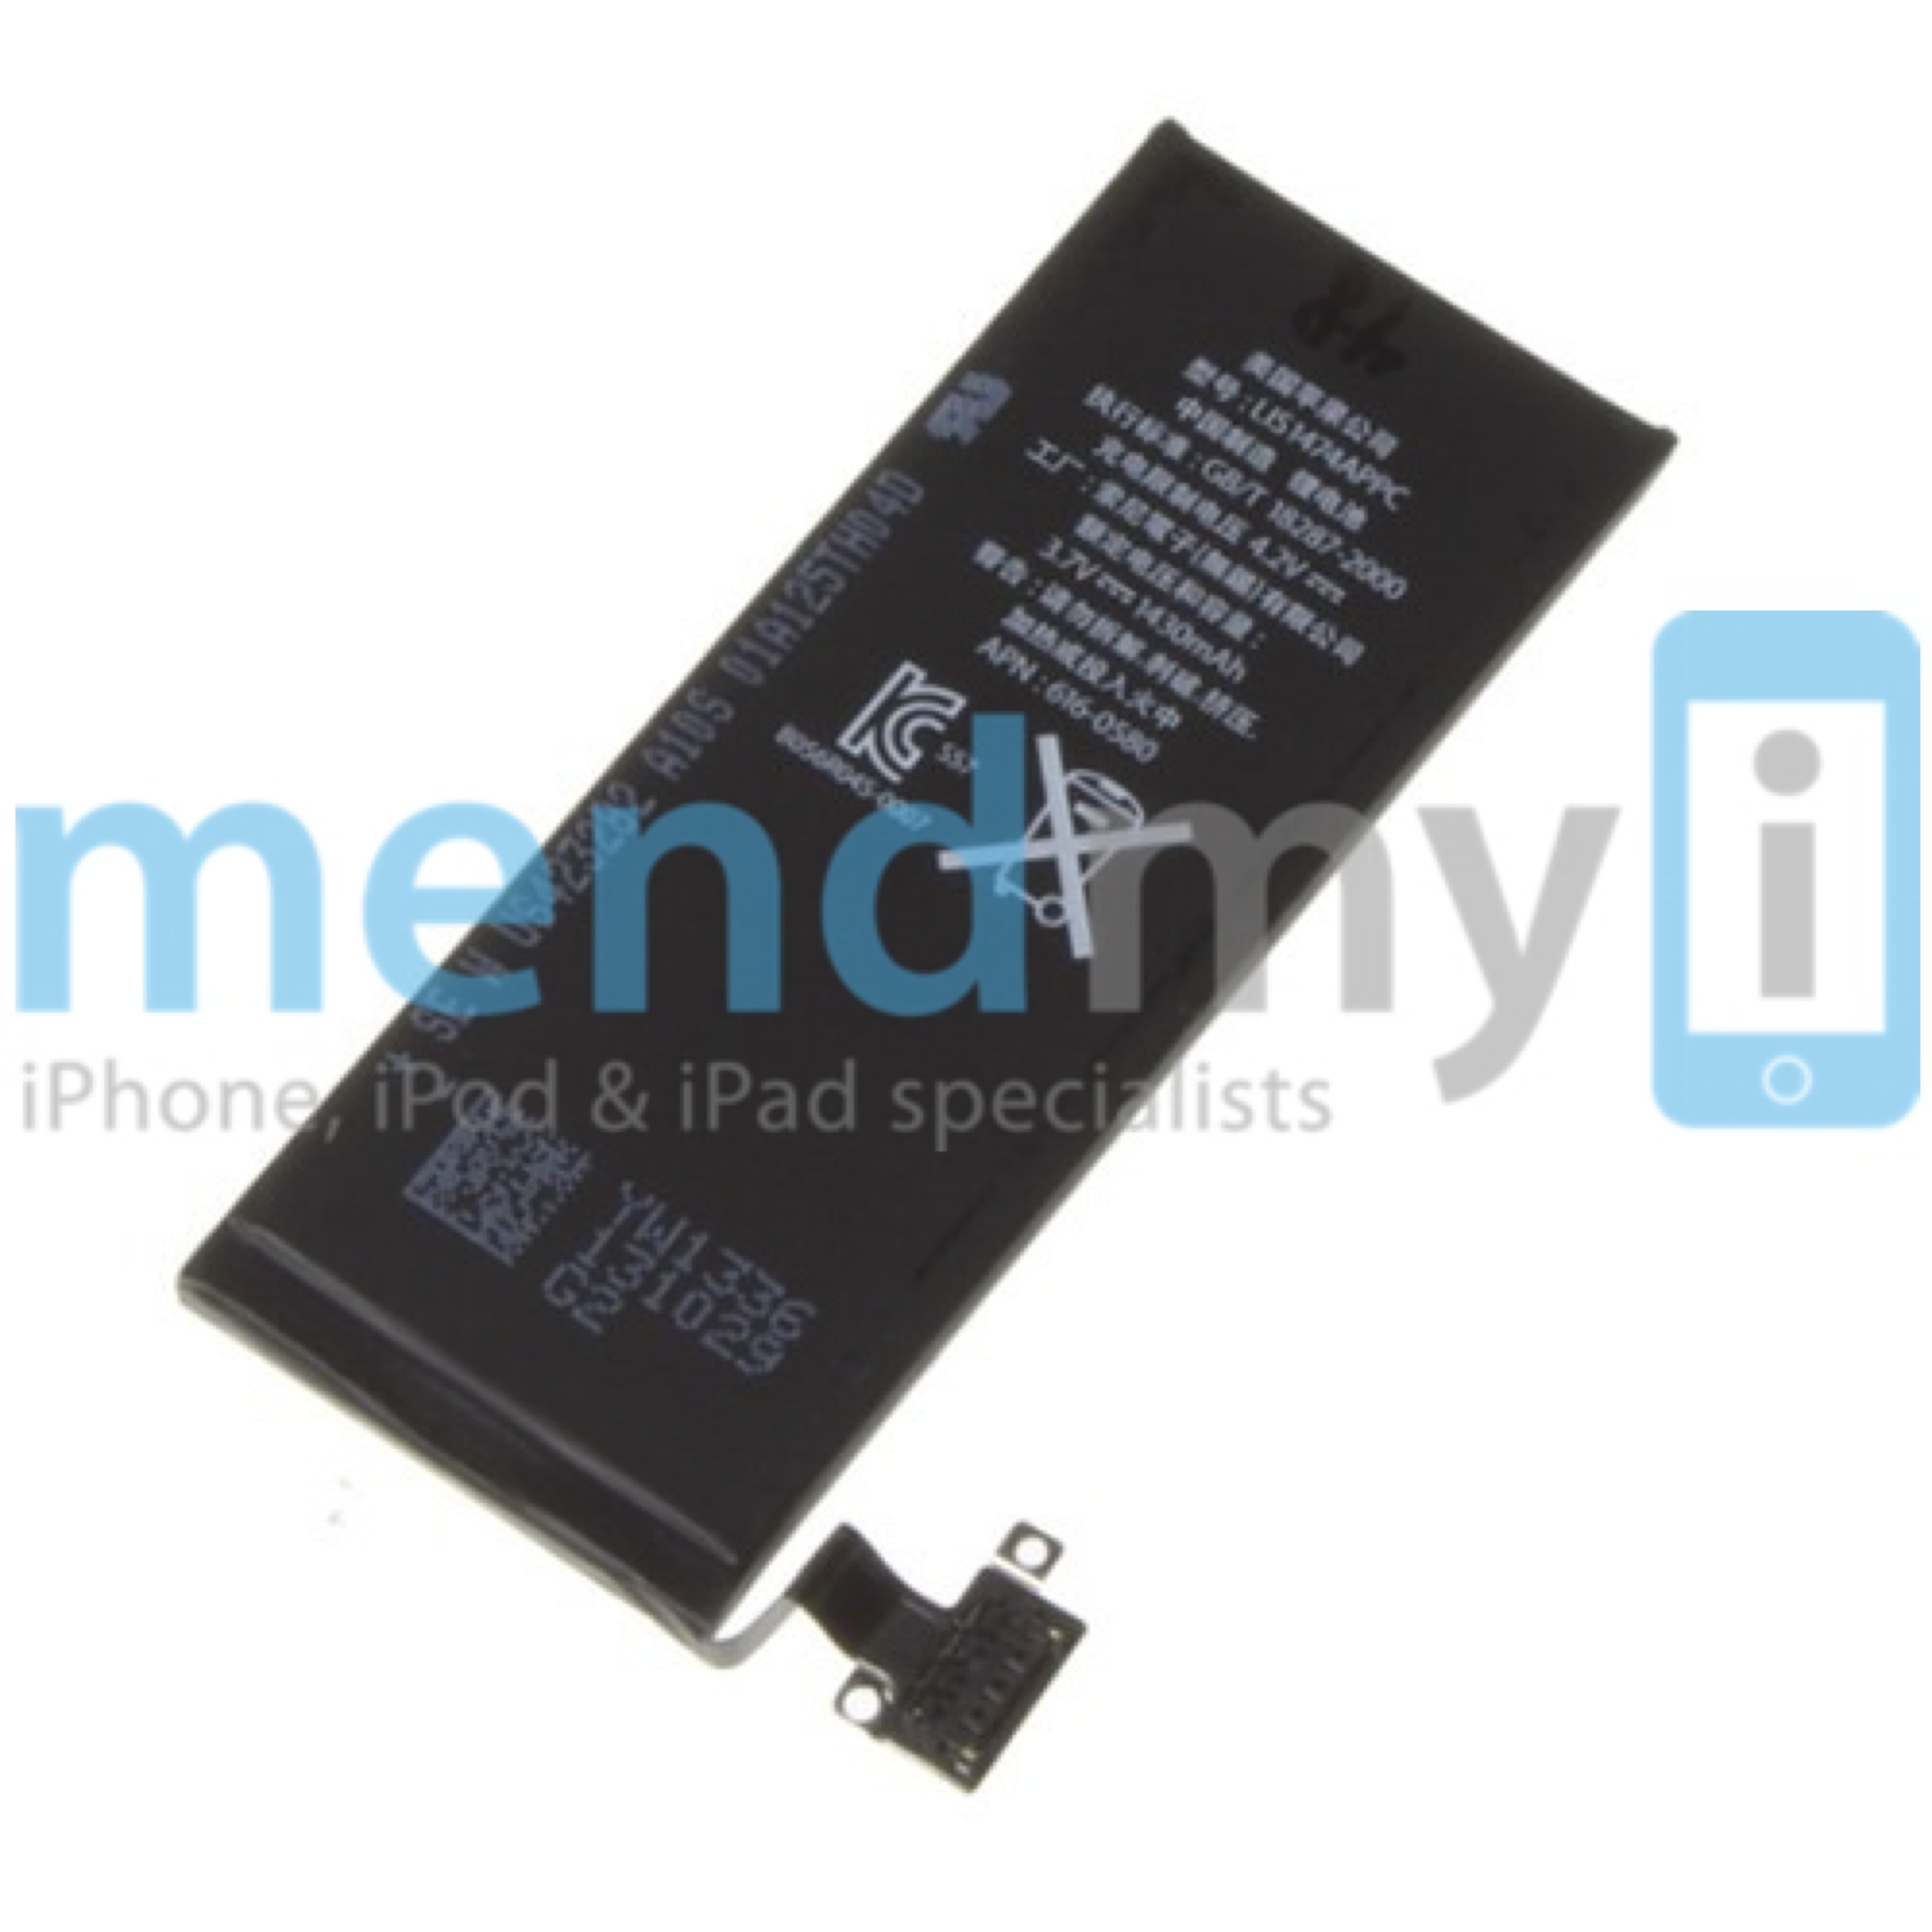 How To Fix Samsung Galaxy S Iii Battery Life Issues Samsung Galaxy S